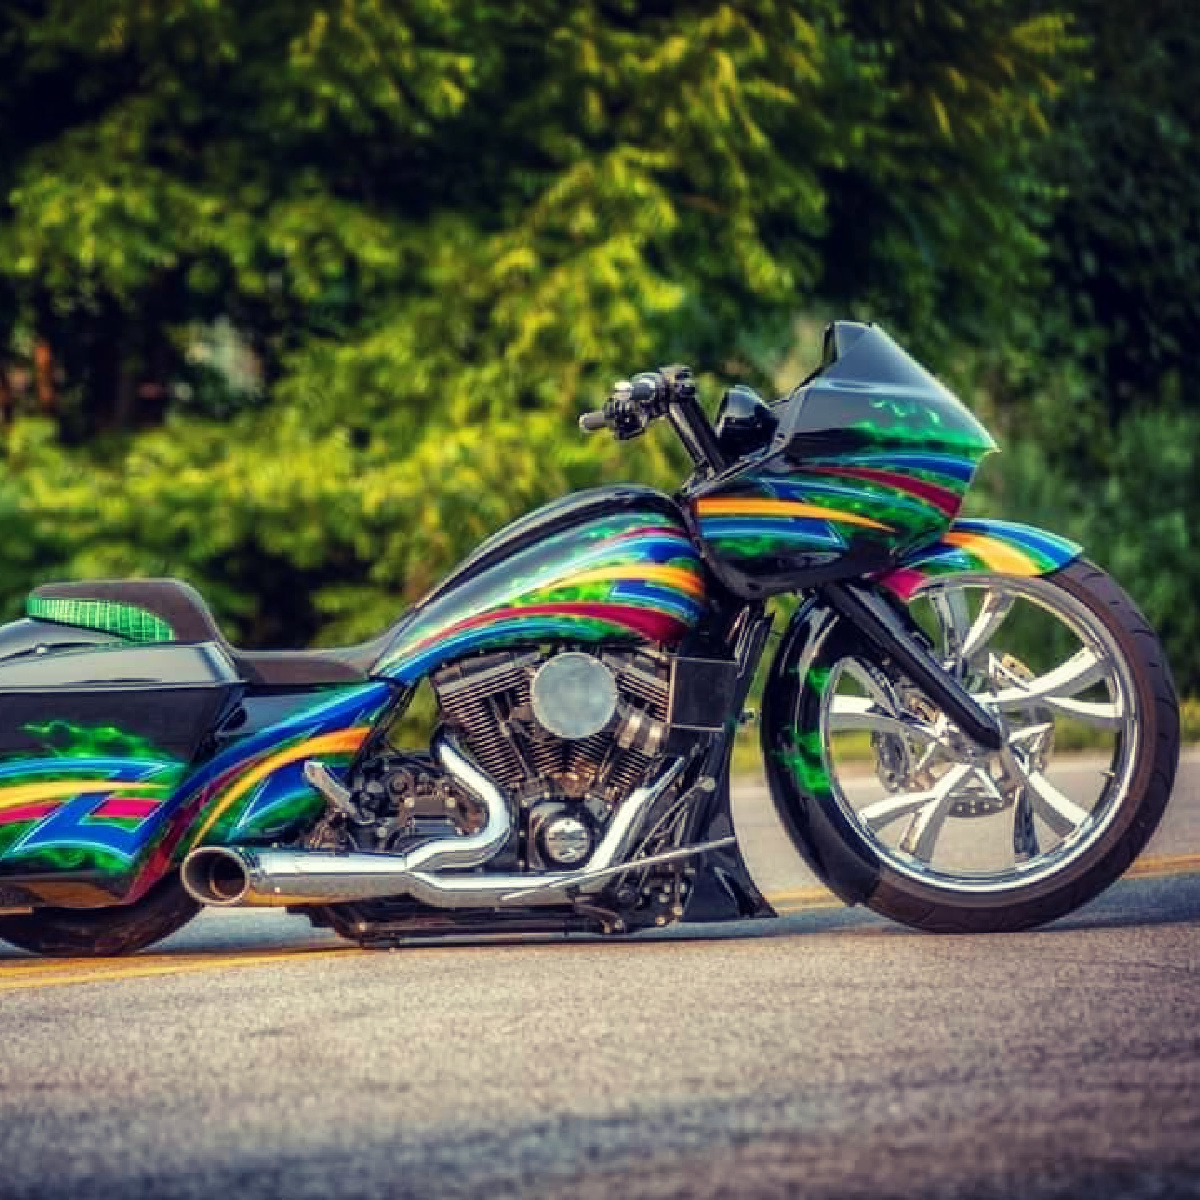 Chrome_SMT_Narcos_Harley_Road_Glide_Motorcycle_Bagger_Wheel_image_gallery_13_1200x1200